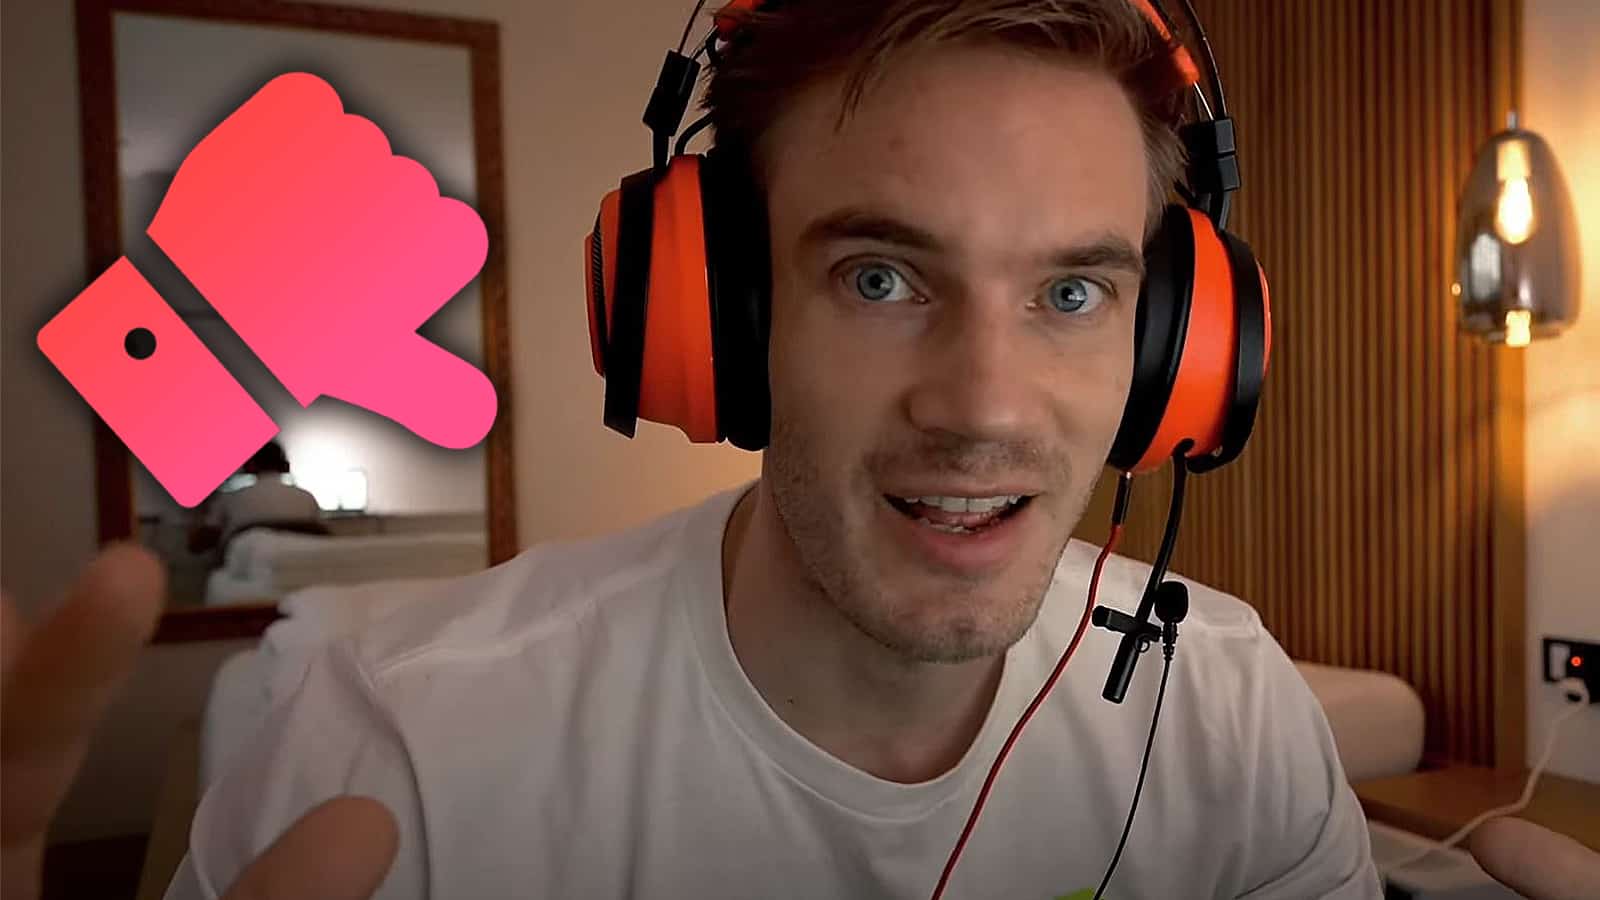 PewDiePie slams YouTube for removing dislike count